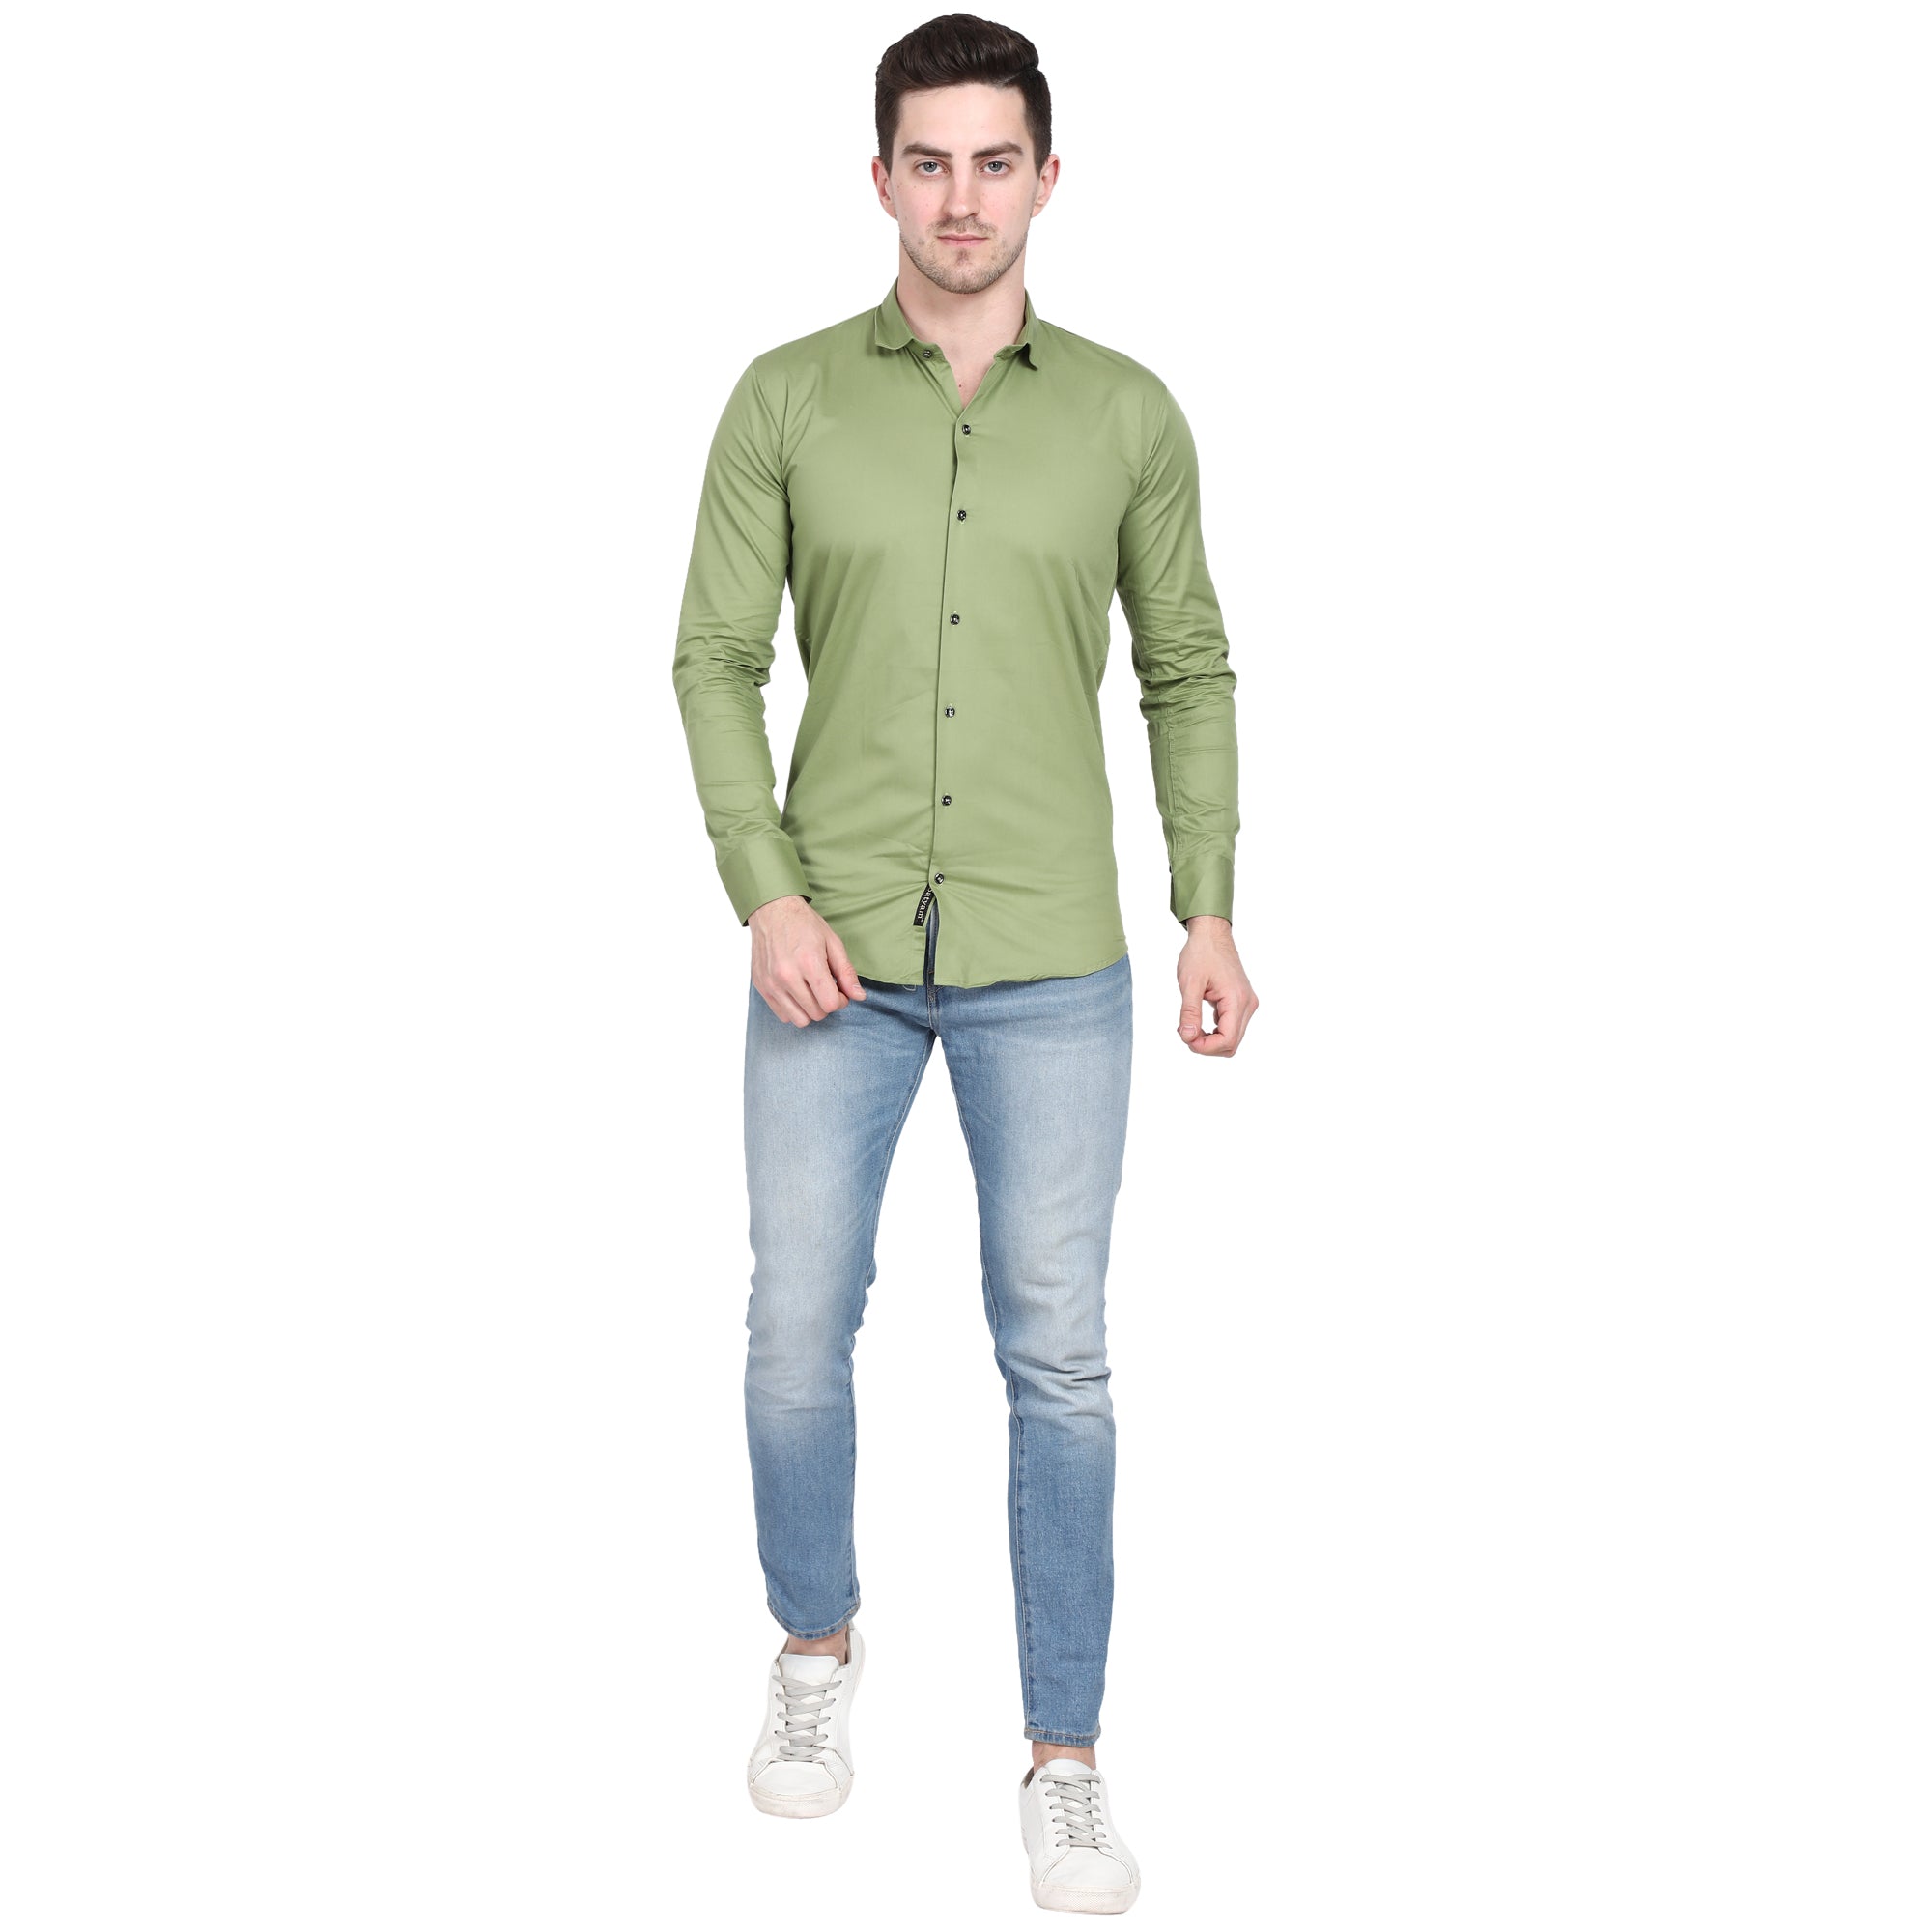 Men Casual Cotton Shirts - Olive Green Colour